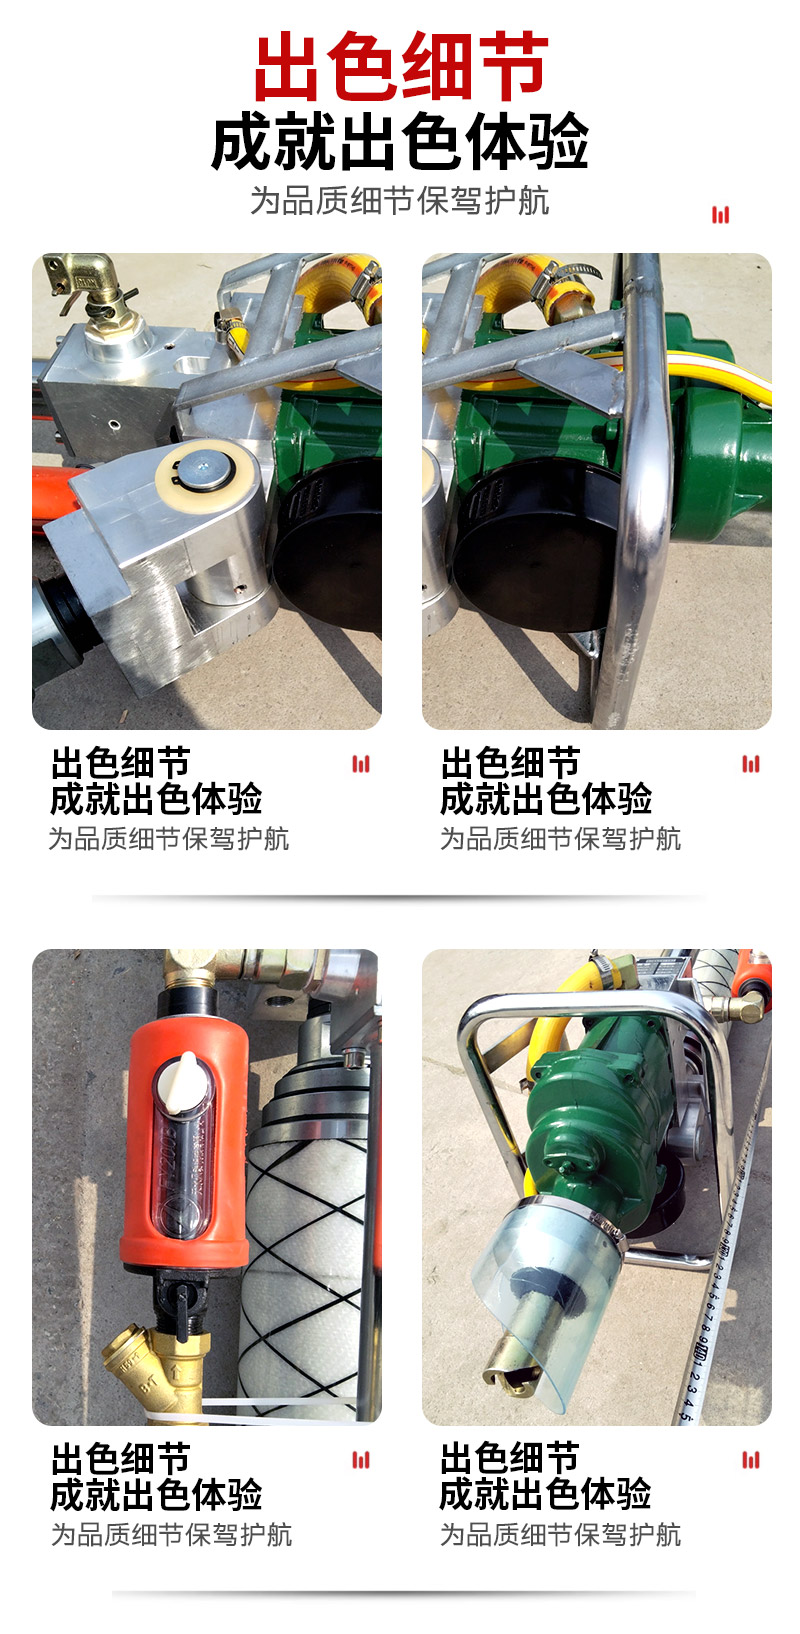 Gas leg anchor cable drilling machine for coal mines, reinforced handheld roof anchor cable drilling machine, underground top hole drilling machine